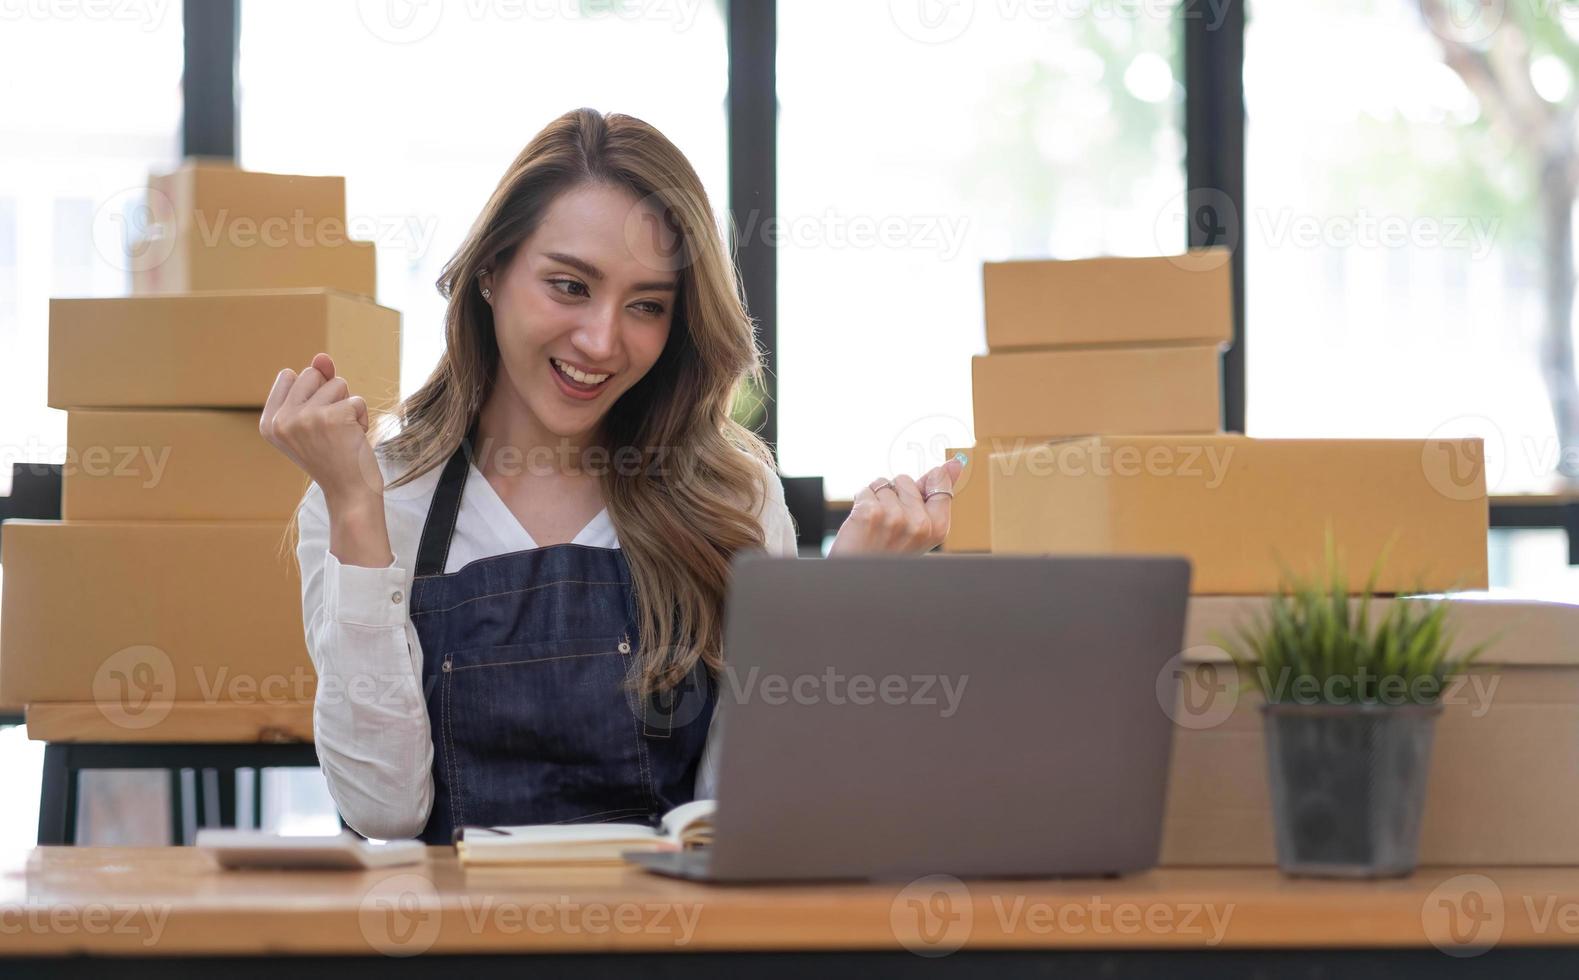 Portrait of Starting small businesses SME owners female entrepreneurs working on receipt box and check online orders to prepare to pack the boxes, sell to customers, SME business ideas online. photo